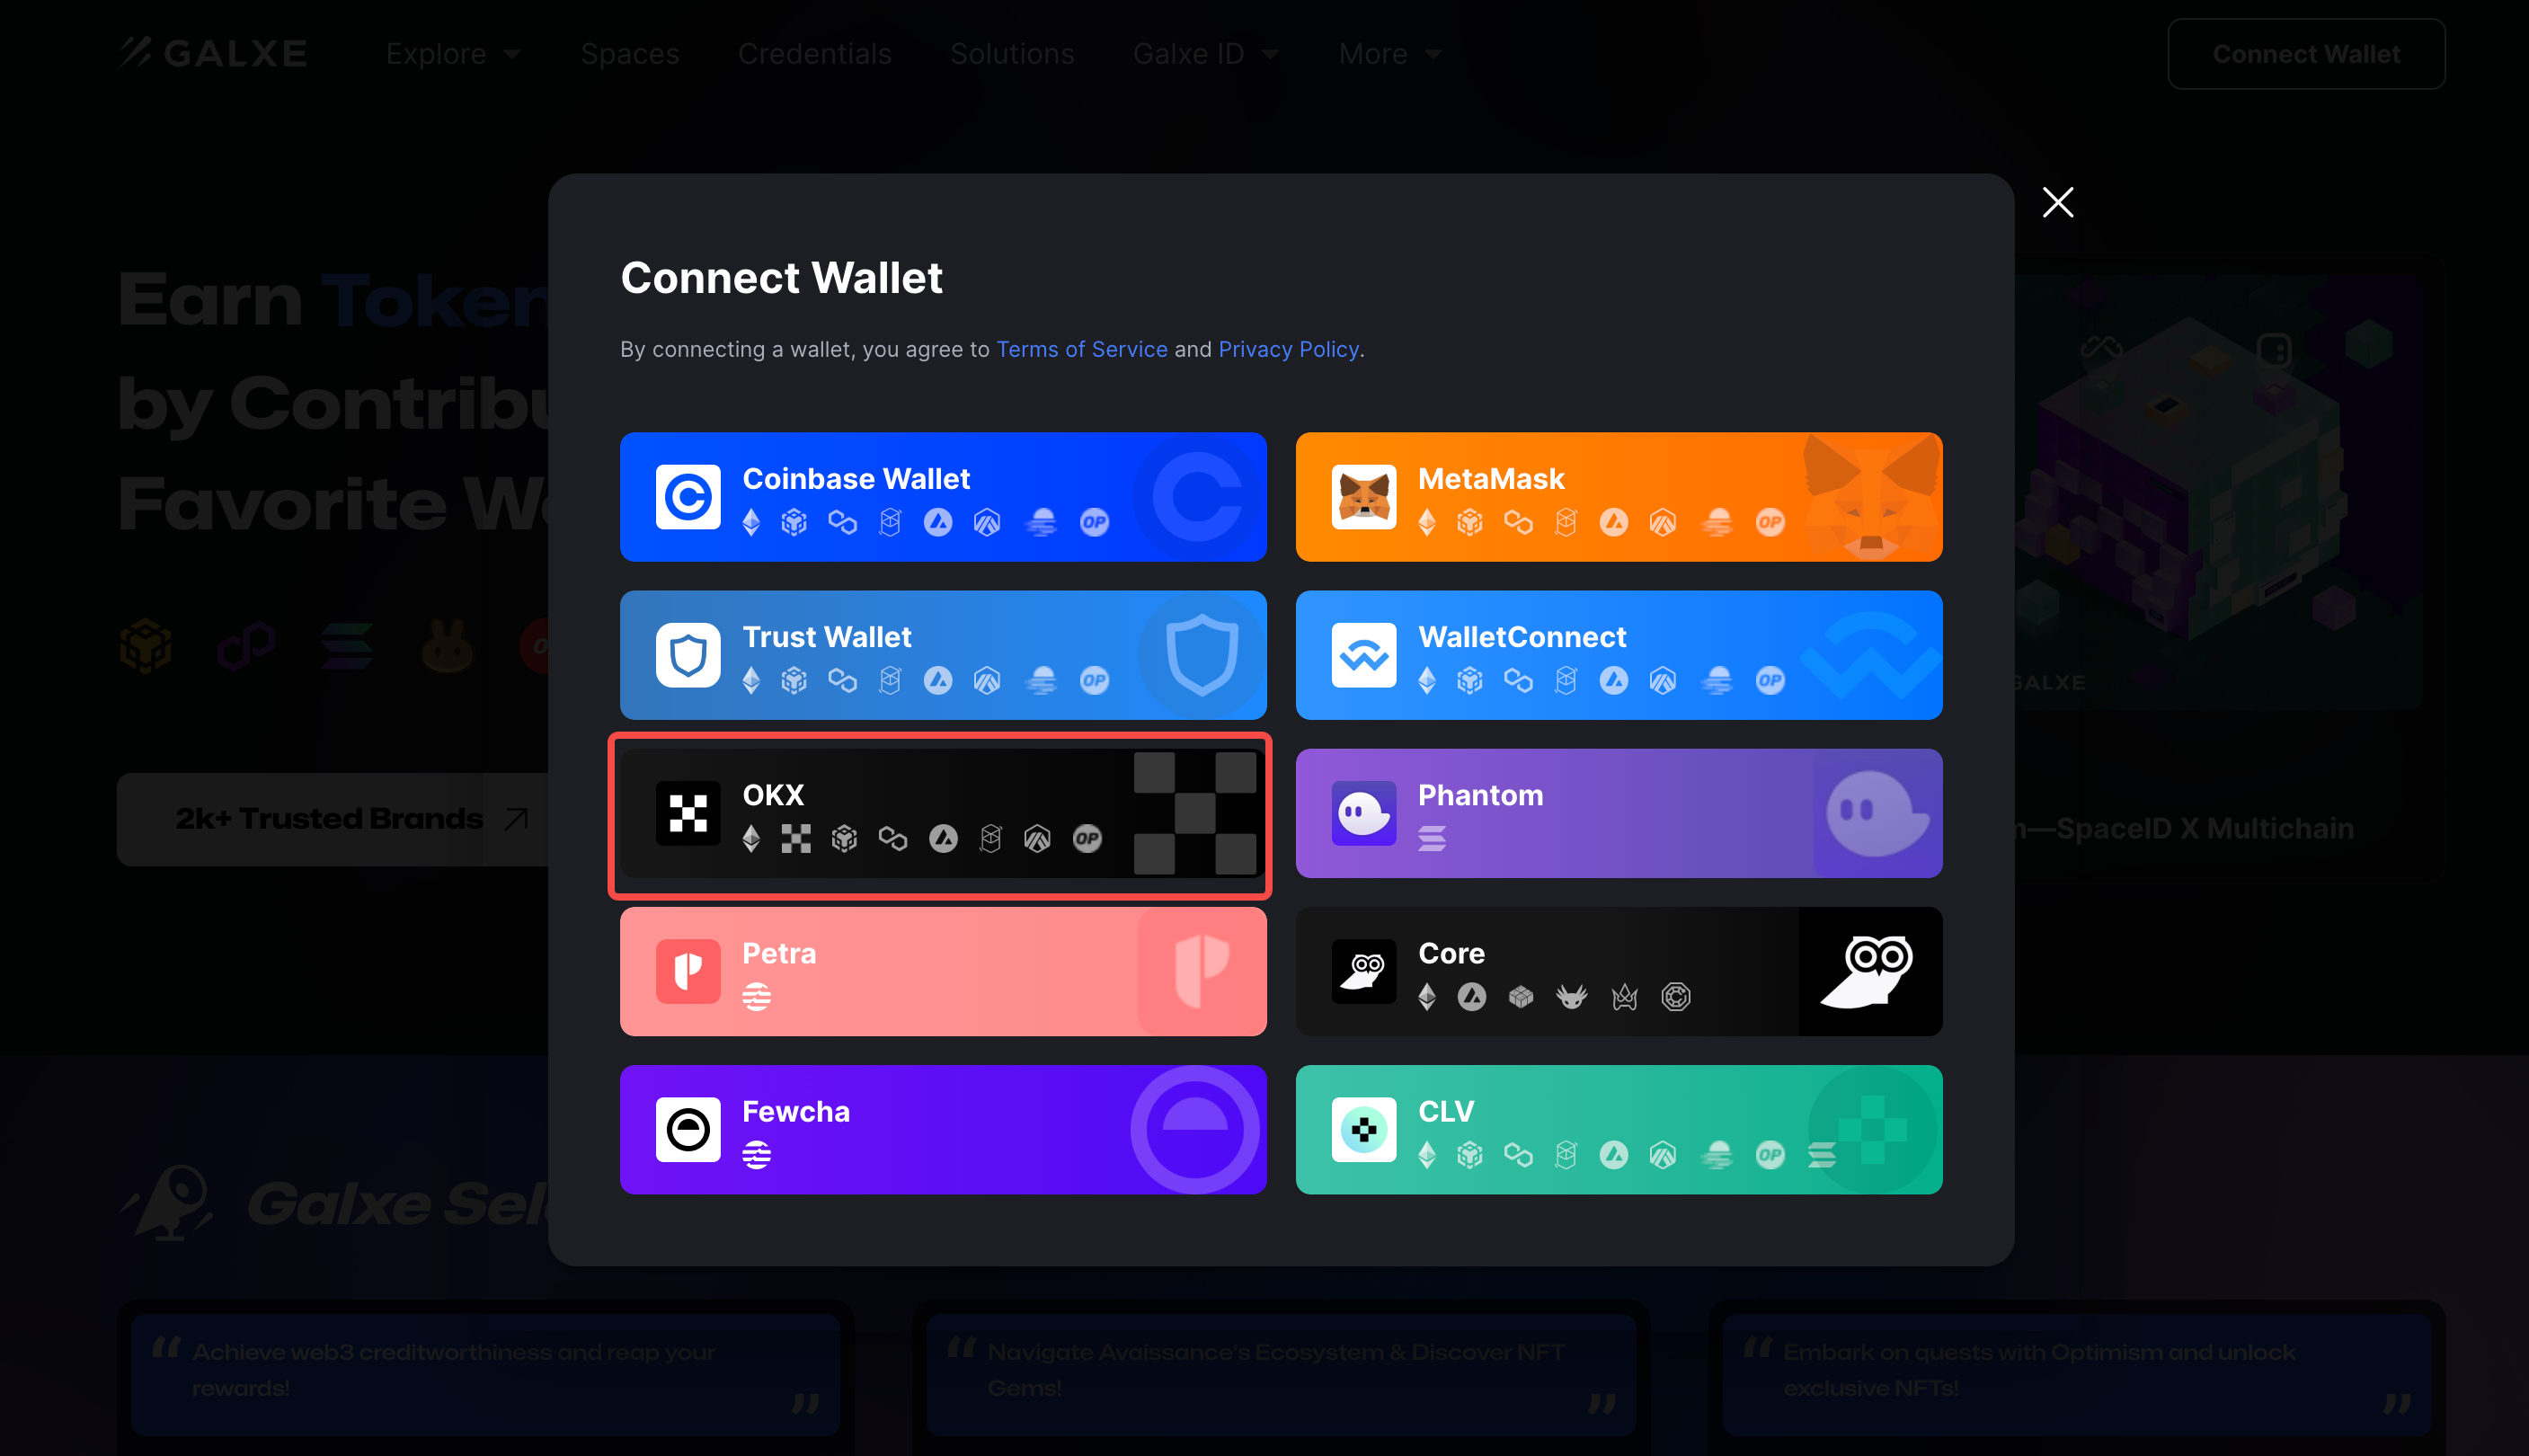 access-galxe-using-the-okx-wallet-web-extension image 6